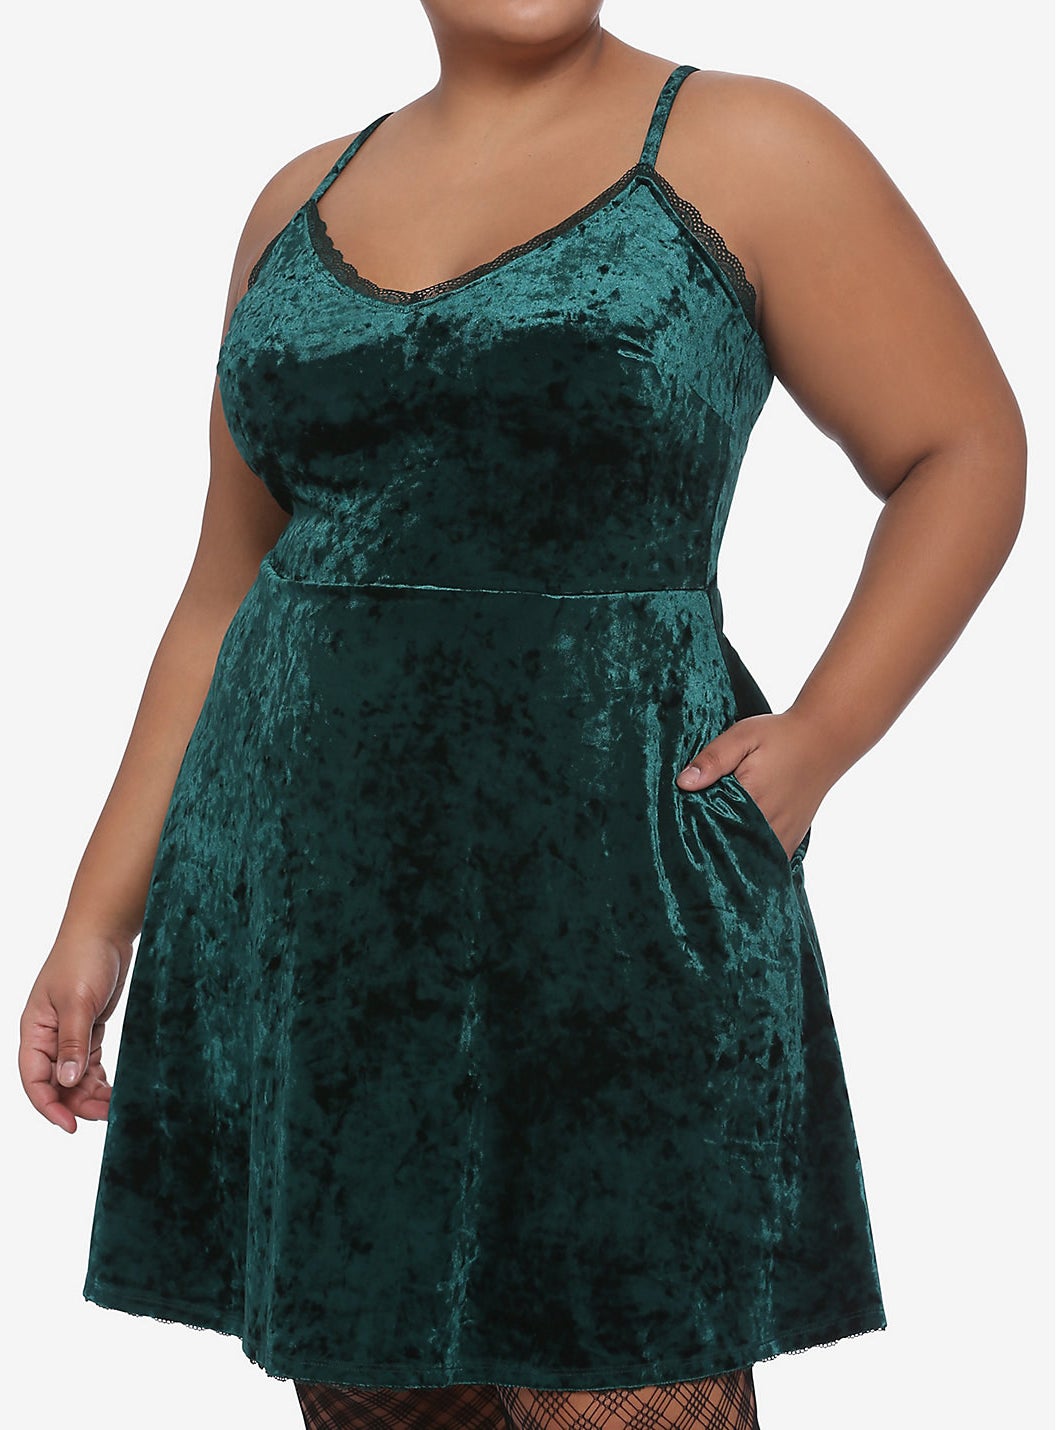 model in emerald mini dress with hand in one of the pockets